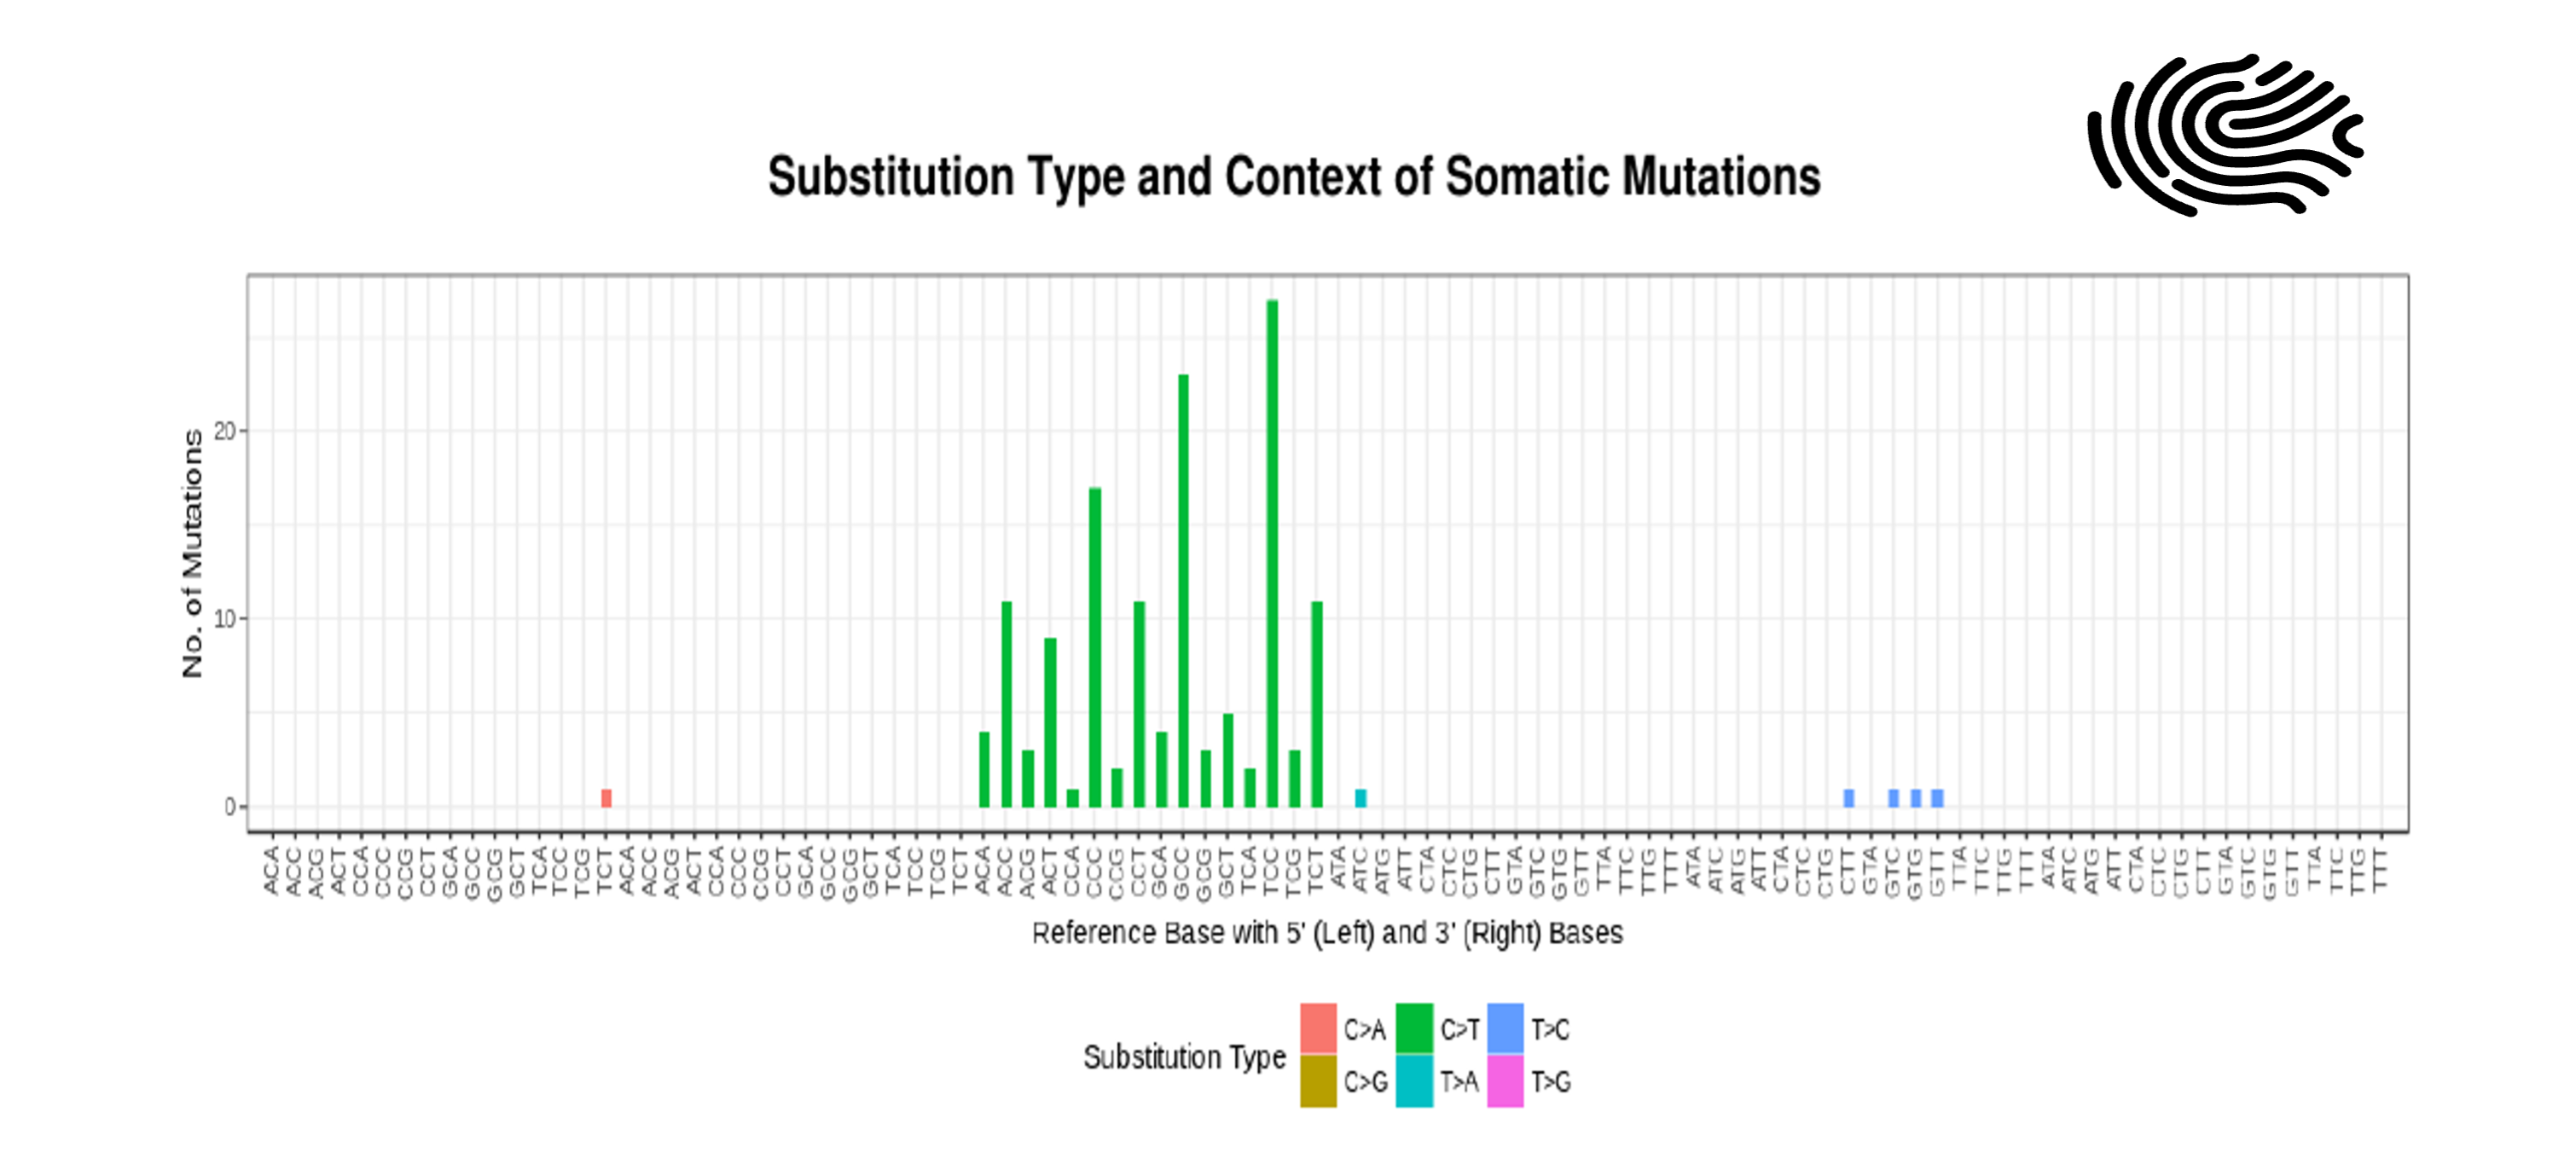 Fig 1: Substitution type and context of somatic mutations